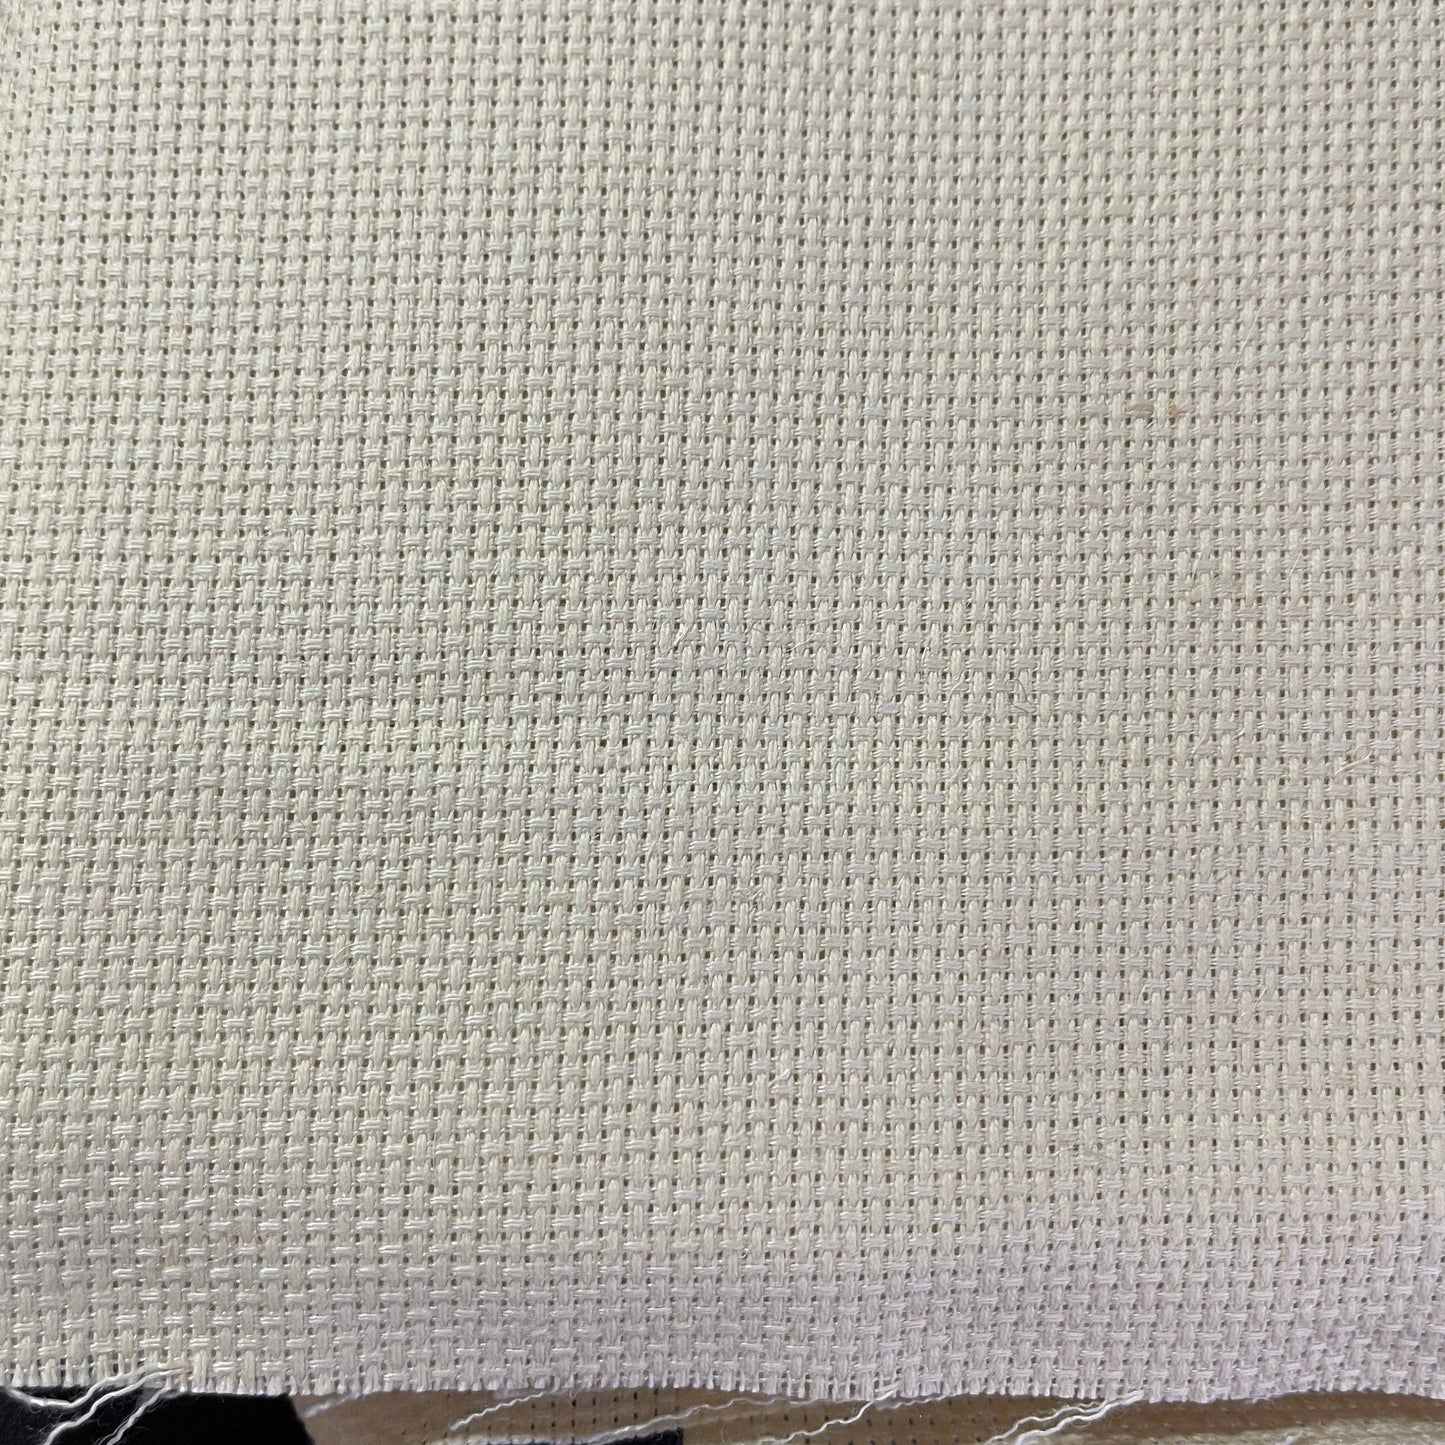 AIDA 14 count Ivory 36 by 60 inches needlecraft fabric